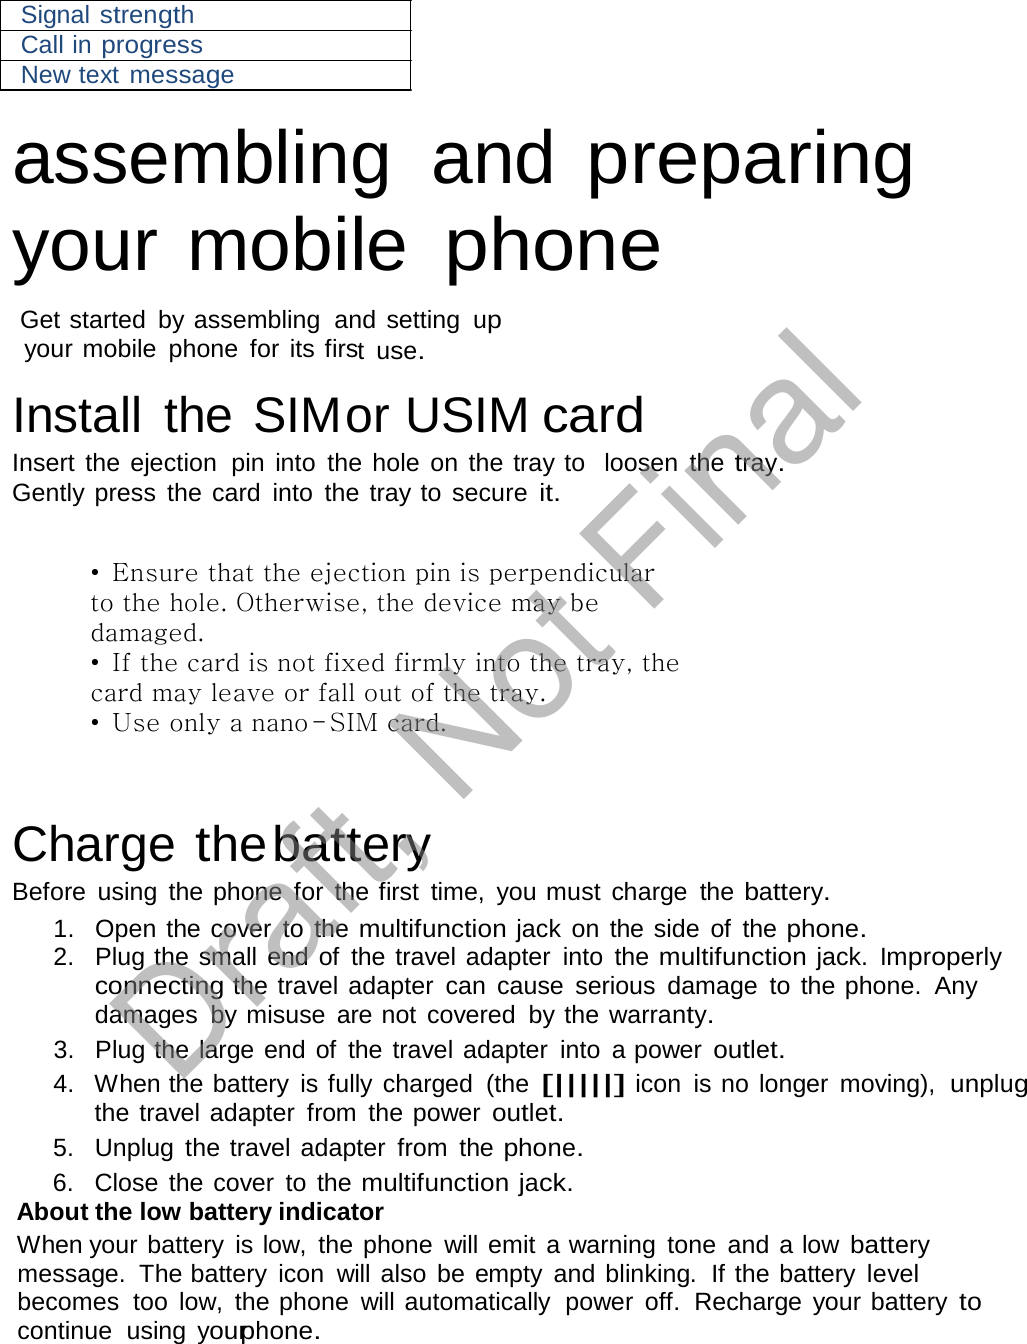  Signal strength Call in progress New text message  assembling  and preparing your mobile phone  Get started  by assembling  and setting  up your mobile  phone  for its first  use.  Install  the SIMor USIM card Insert the ejection  pin into  the hole on the tray to  loosen  the tray. Gently press  the card  into  the tray to  secure it.   • Ensure that the ejection pin is perpendicular to the hole. Otherwise, the device may be damaged. • If the card is not fixed firmly into the tray, the card may leave or fall out of the tray. • Use only a nano-SIM card.     Charge the battery Before  using  the phone  for  the first  time,  you must  charge  the battery. 1.  Open the cover  to the multifunction jack on the side  of  the phone. 2.   Plug the small end of  the travel adapter  into  the multifunction jack. Improperly connecting the travel adapter  can  cause  serious  damage  to the phone.  Any damages  by misuse  are not  covered  by the warranty. 3.   Plug the large end of  the travel adapter  into  a power outlet. 4.   When the battery  is fully charged  (the [|||||] icon  is no longer  moving),  unplug the travel adapter  from  the power outlet. 5.   Unplug  the travel adapter  from  the phone. 6.   Close the cover  to the multifunction jack. About the low battery indicator When your battery  is low,  the phone  will emit a warning  tone  and a low battery message.  The battery  icon  will also  be empty and blinking.  If the battery level becomes  too  low,  the phone  will automatically  power  off.  Recharge your battery to continue  using  yourphone. Draft, Not Final